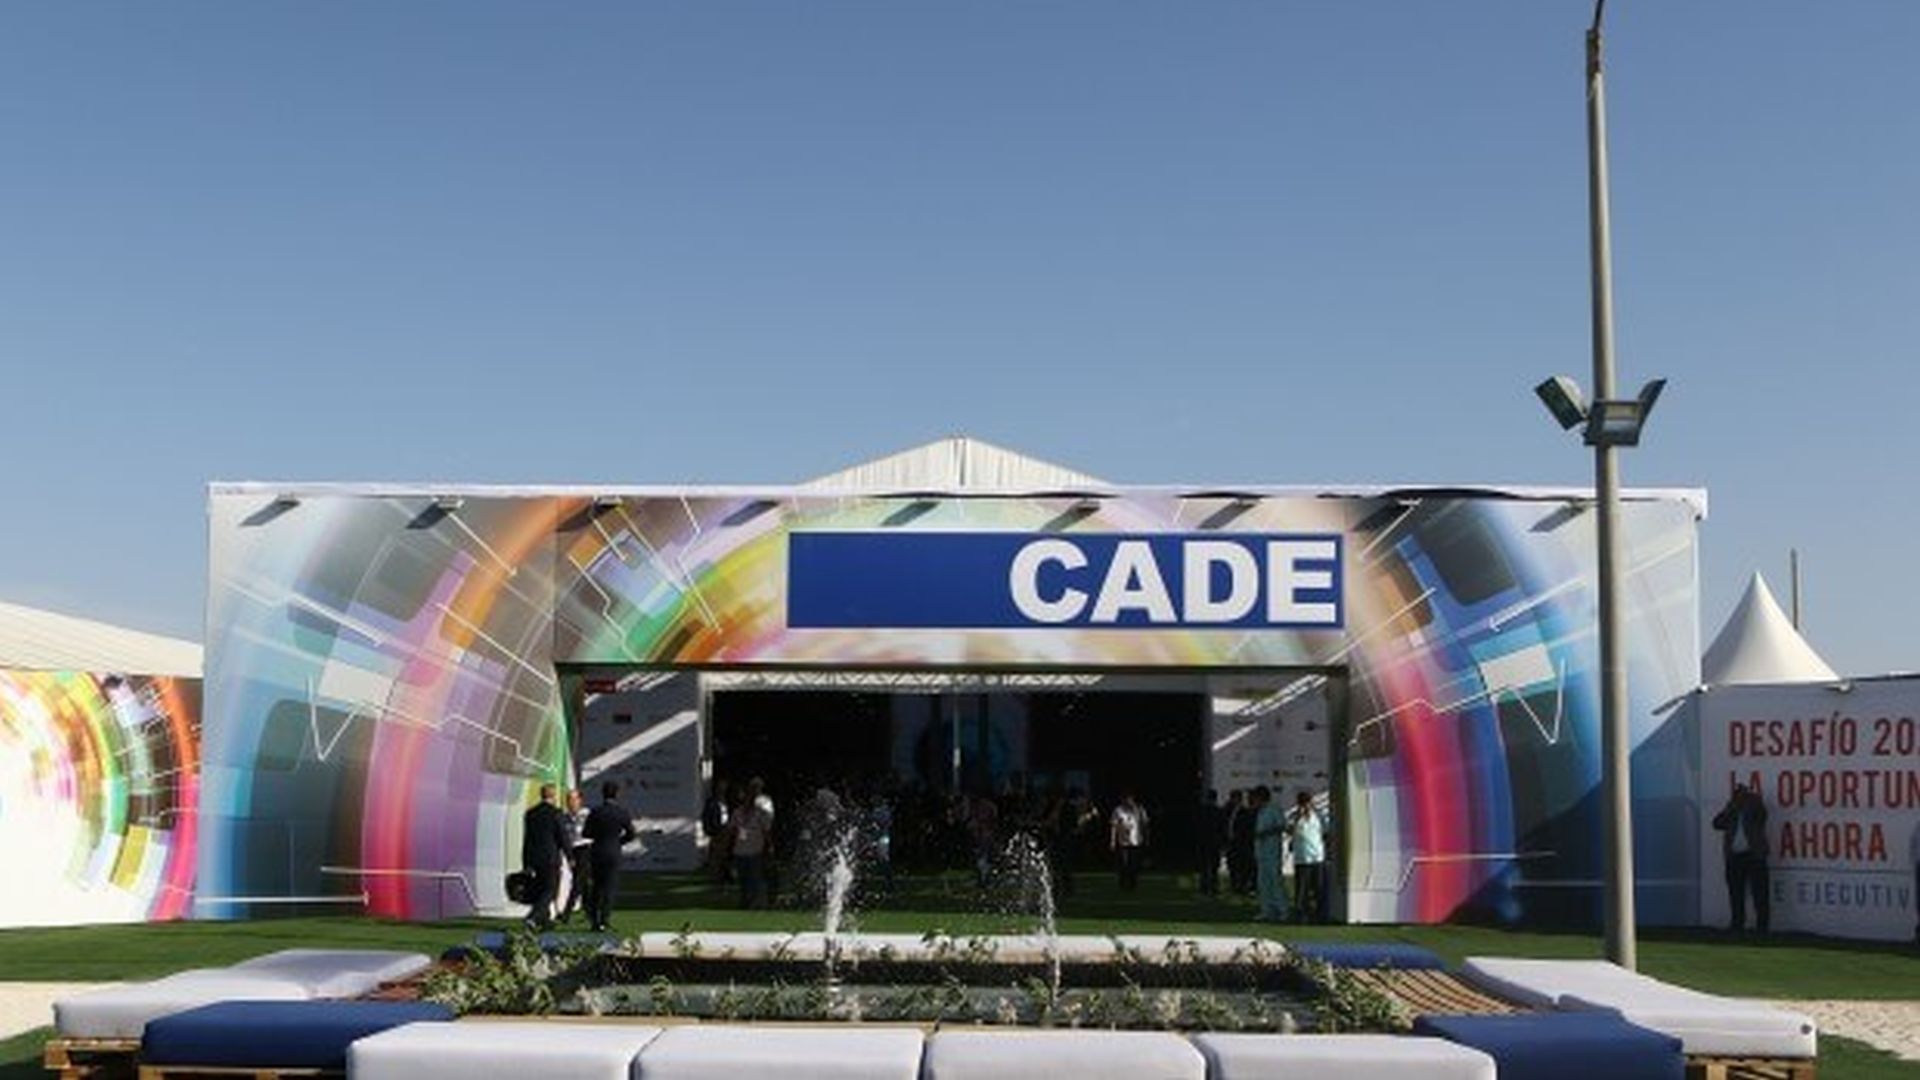 CADE Ejecutivos will move to Cusco this year after 11 editions between Lima and Paracas.